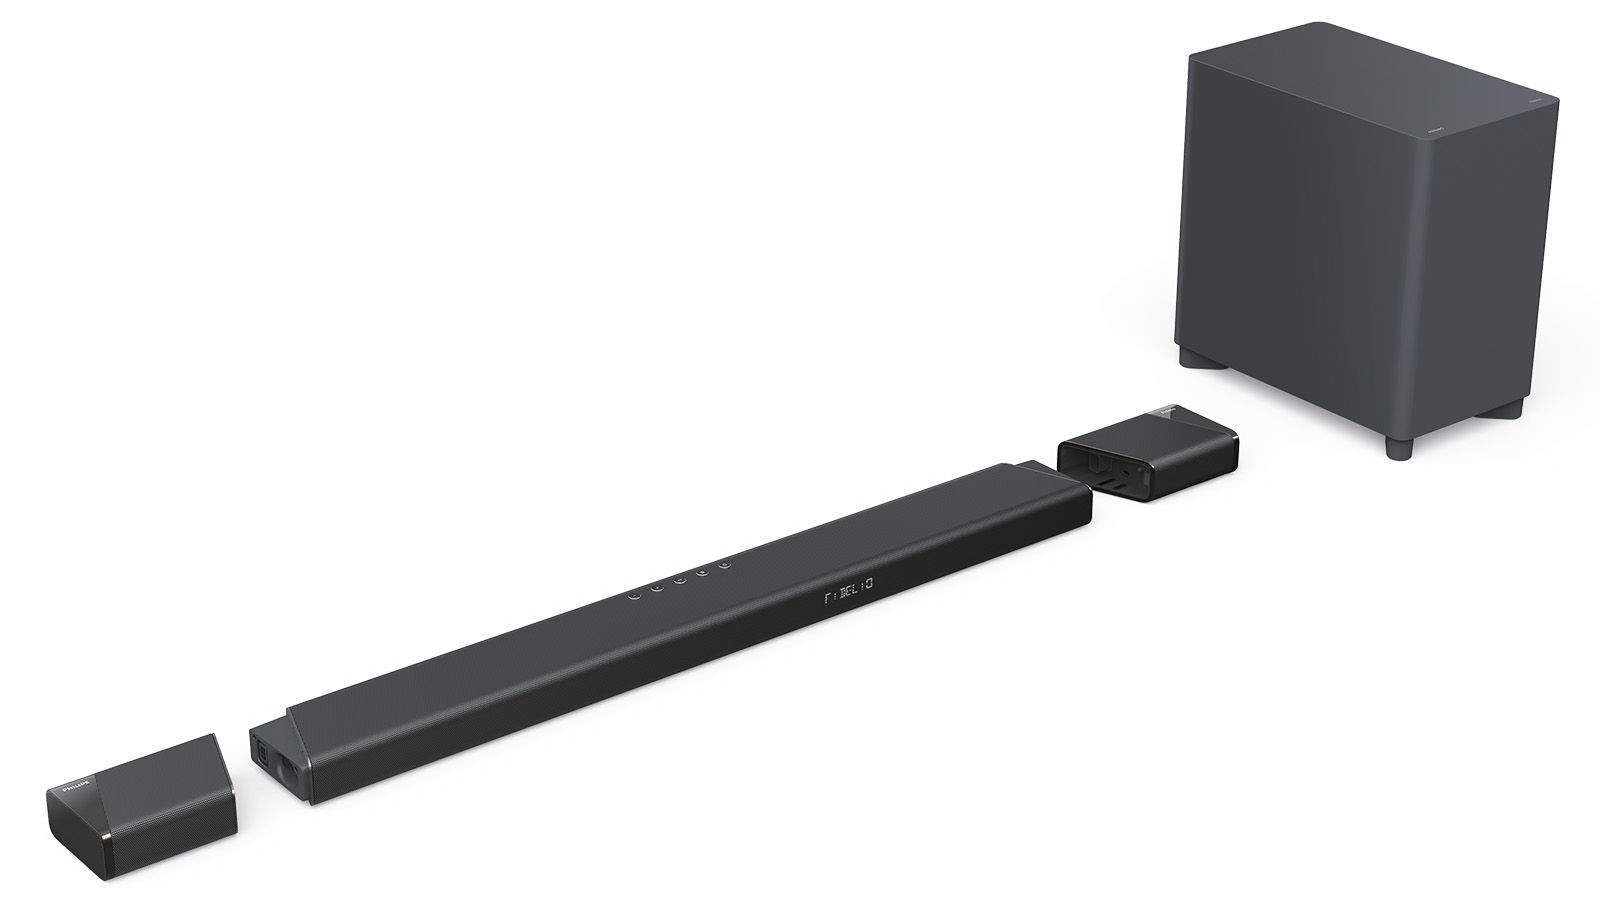 Philips Fidelio B97 and B95 soundbars come with Dolby Atmos elevation units photo 3